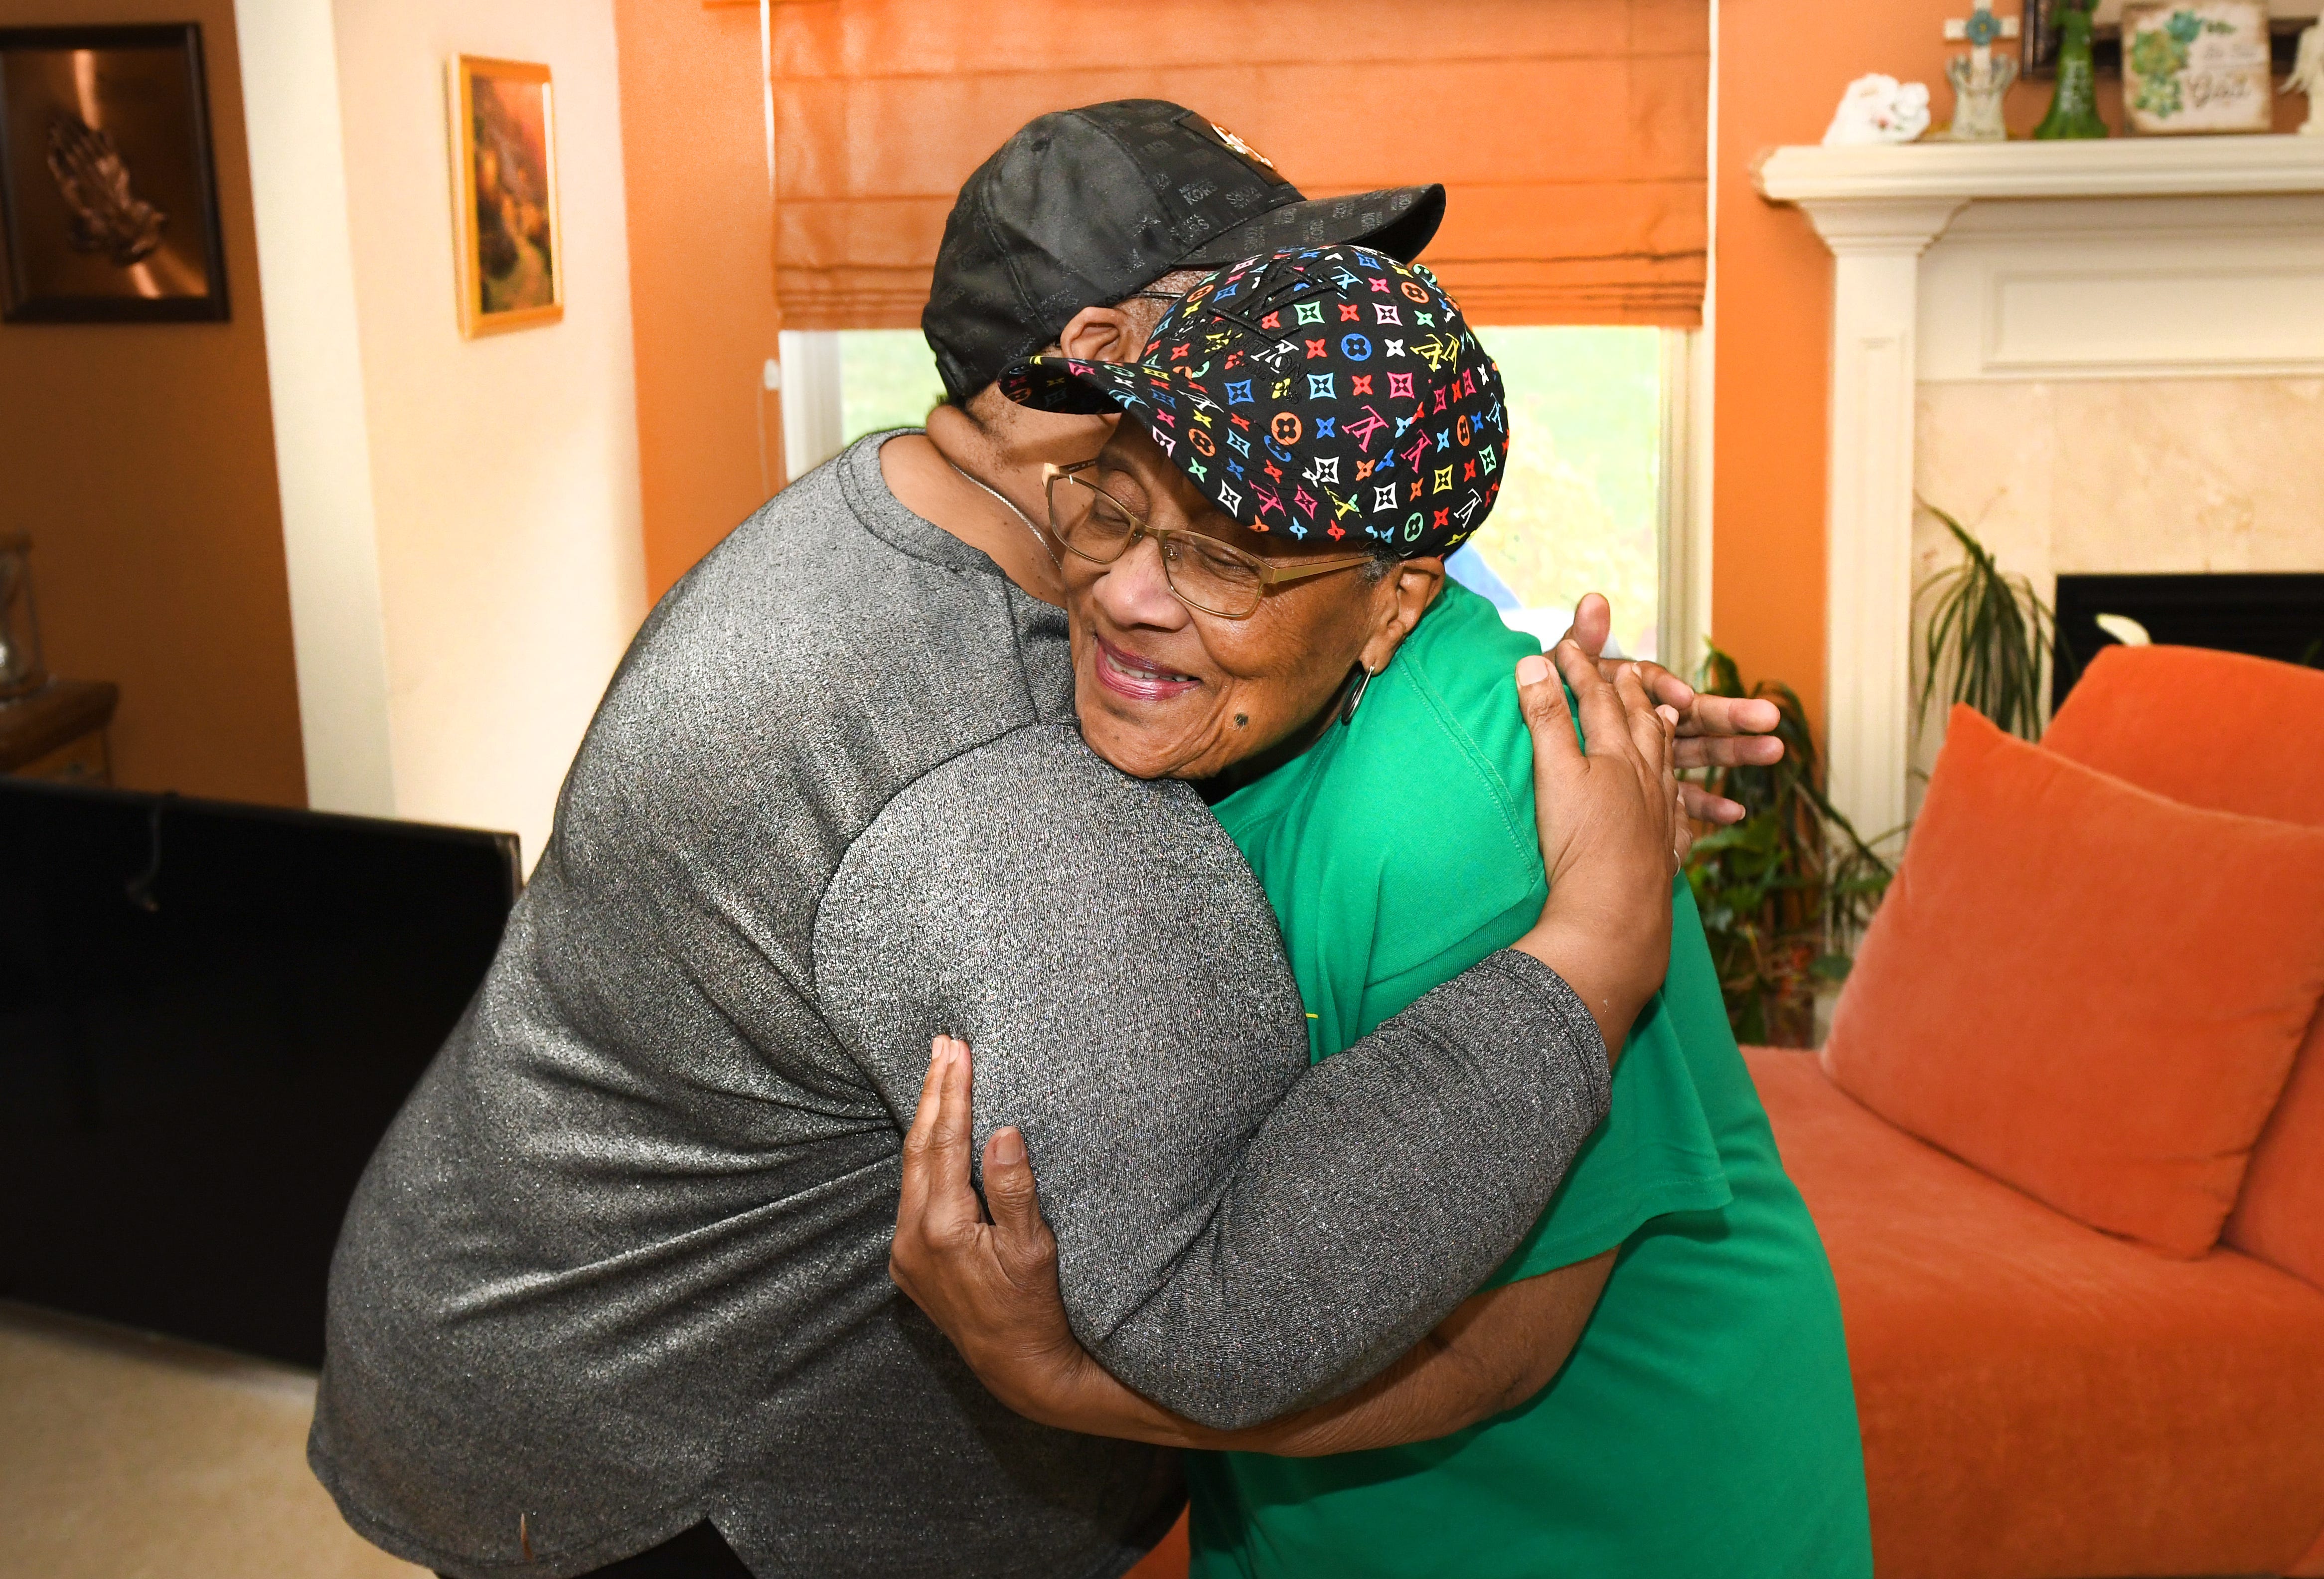 Selina Smith, 63, hugs her mother, Delois McMillan, 85, as she is cared for by her daughter in Pontiac. Smith, is a sandwiched generational caregiver.